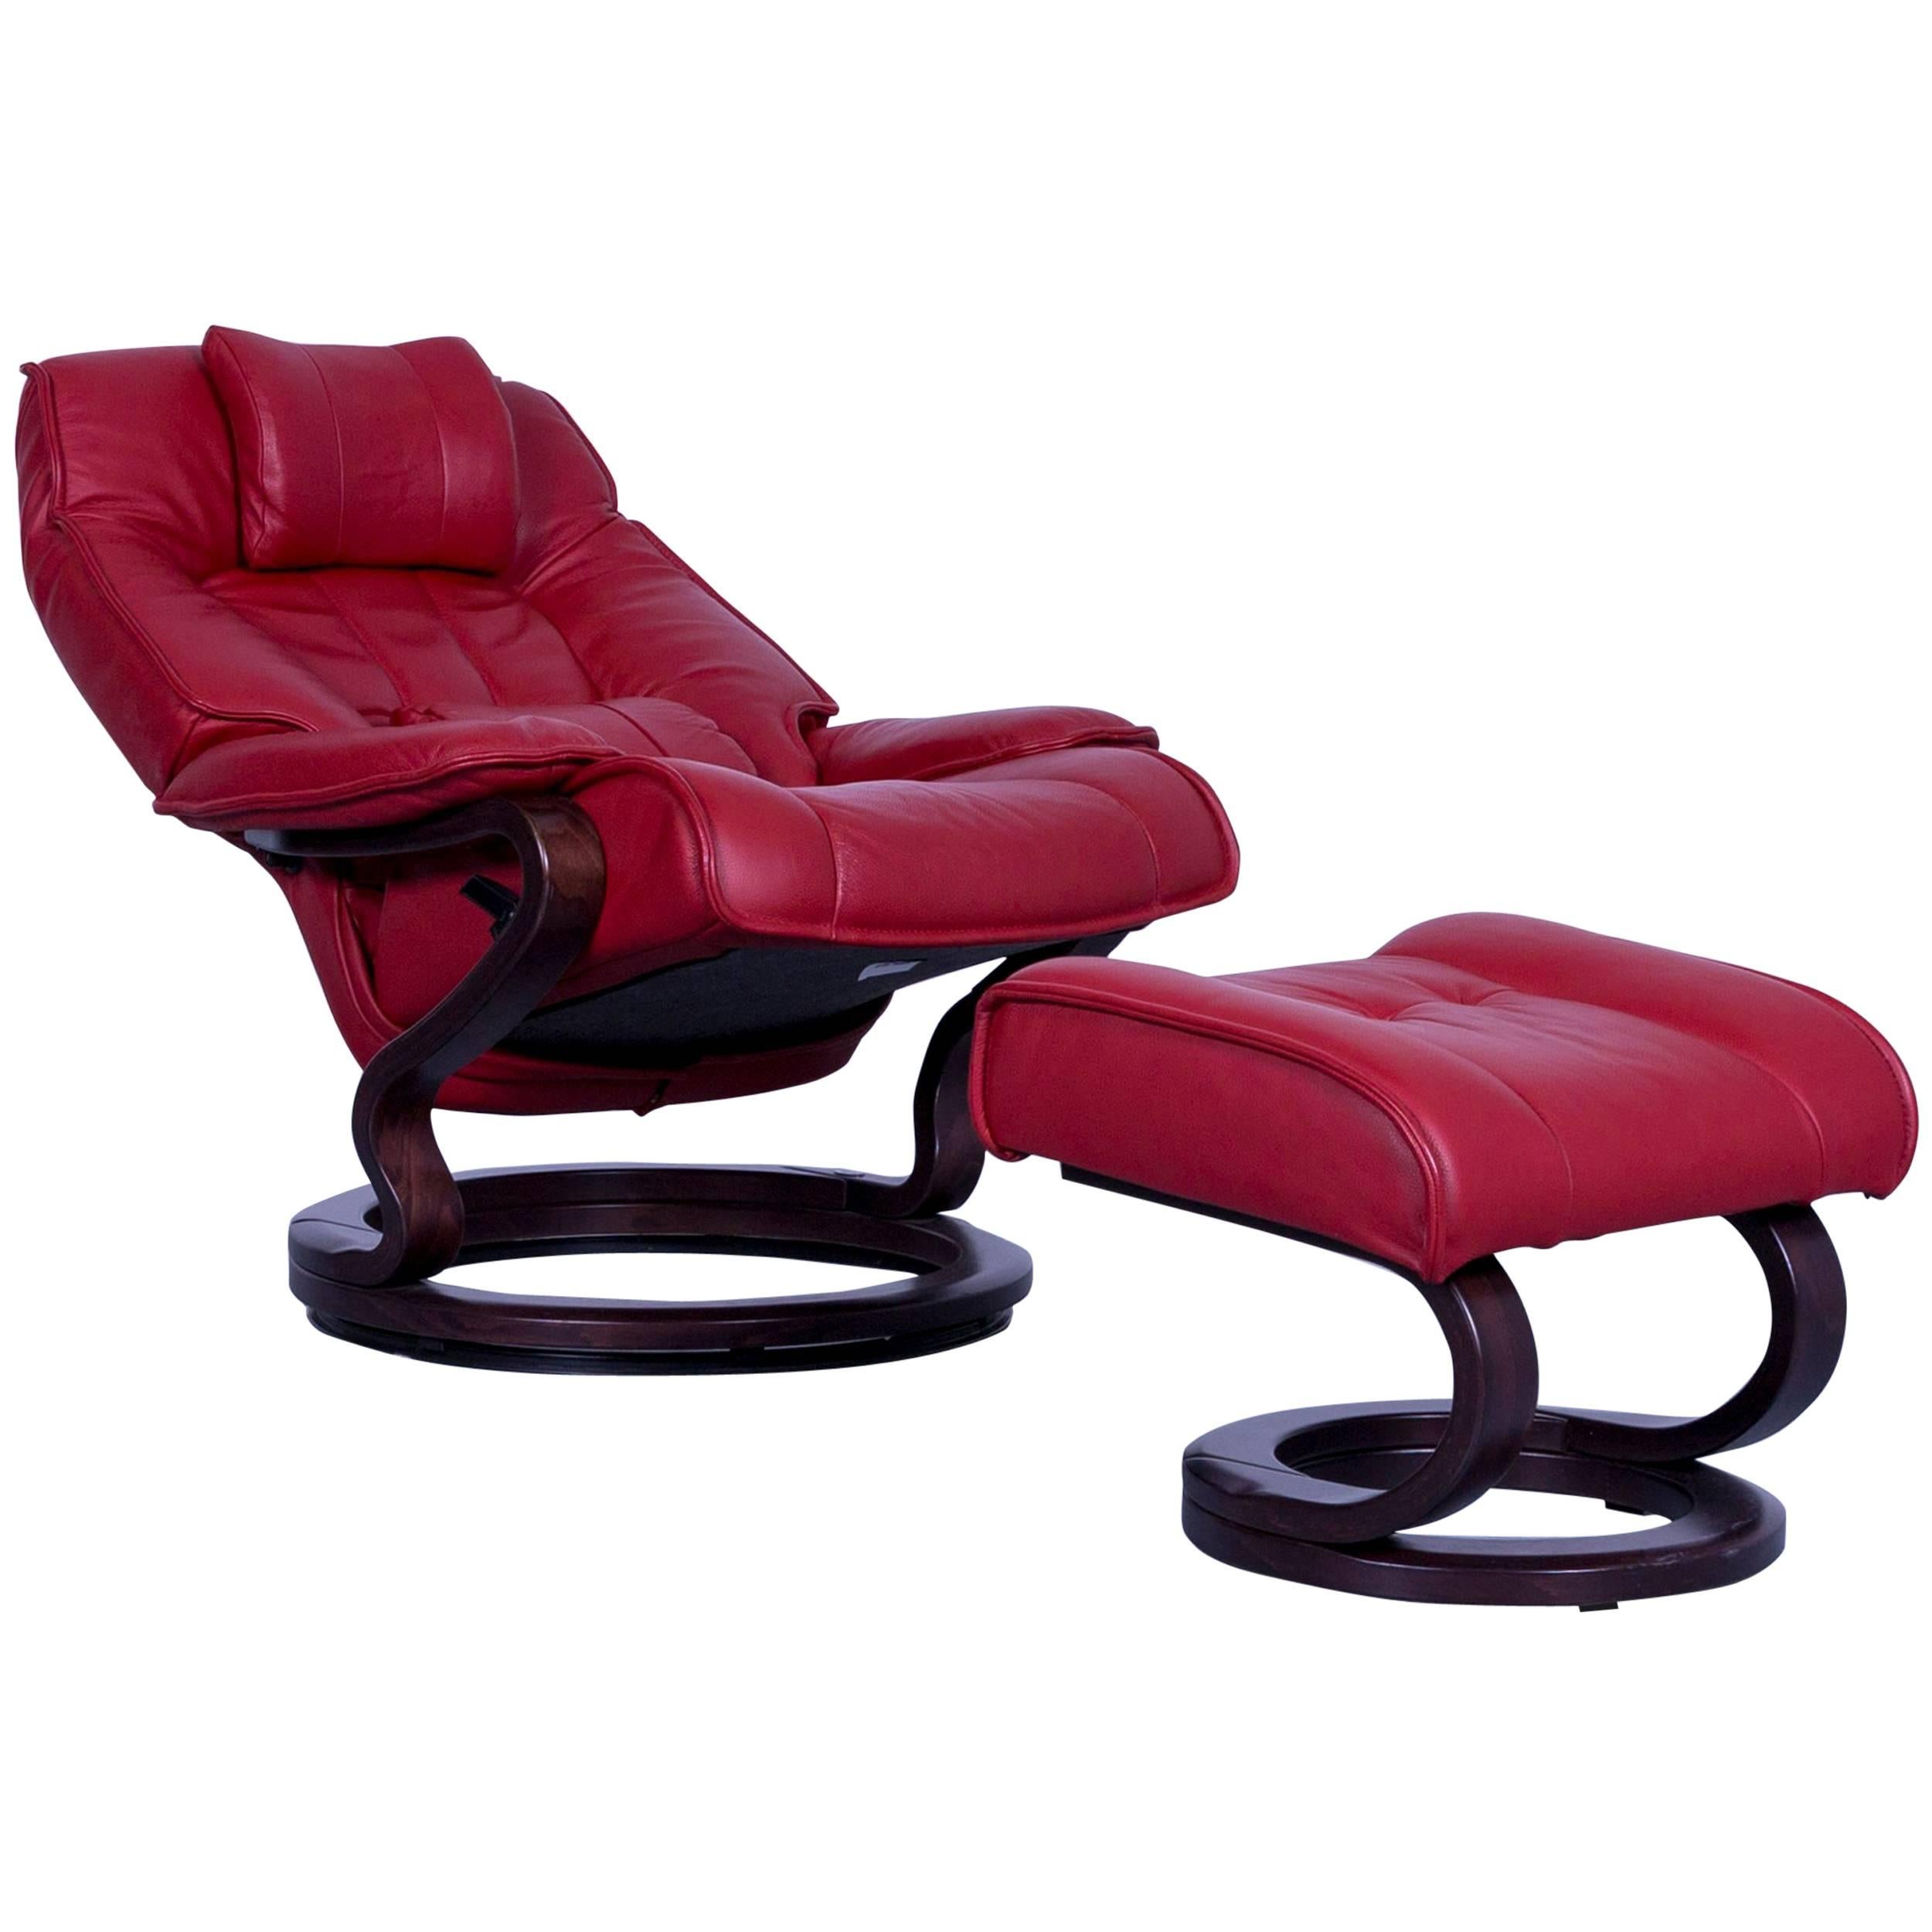 Himolla Zerostress Armchair and Footstool Set Leather Red Recliner